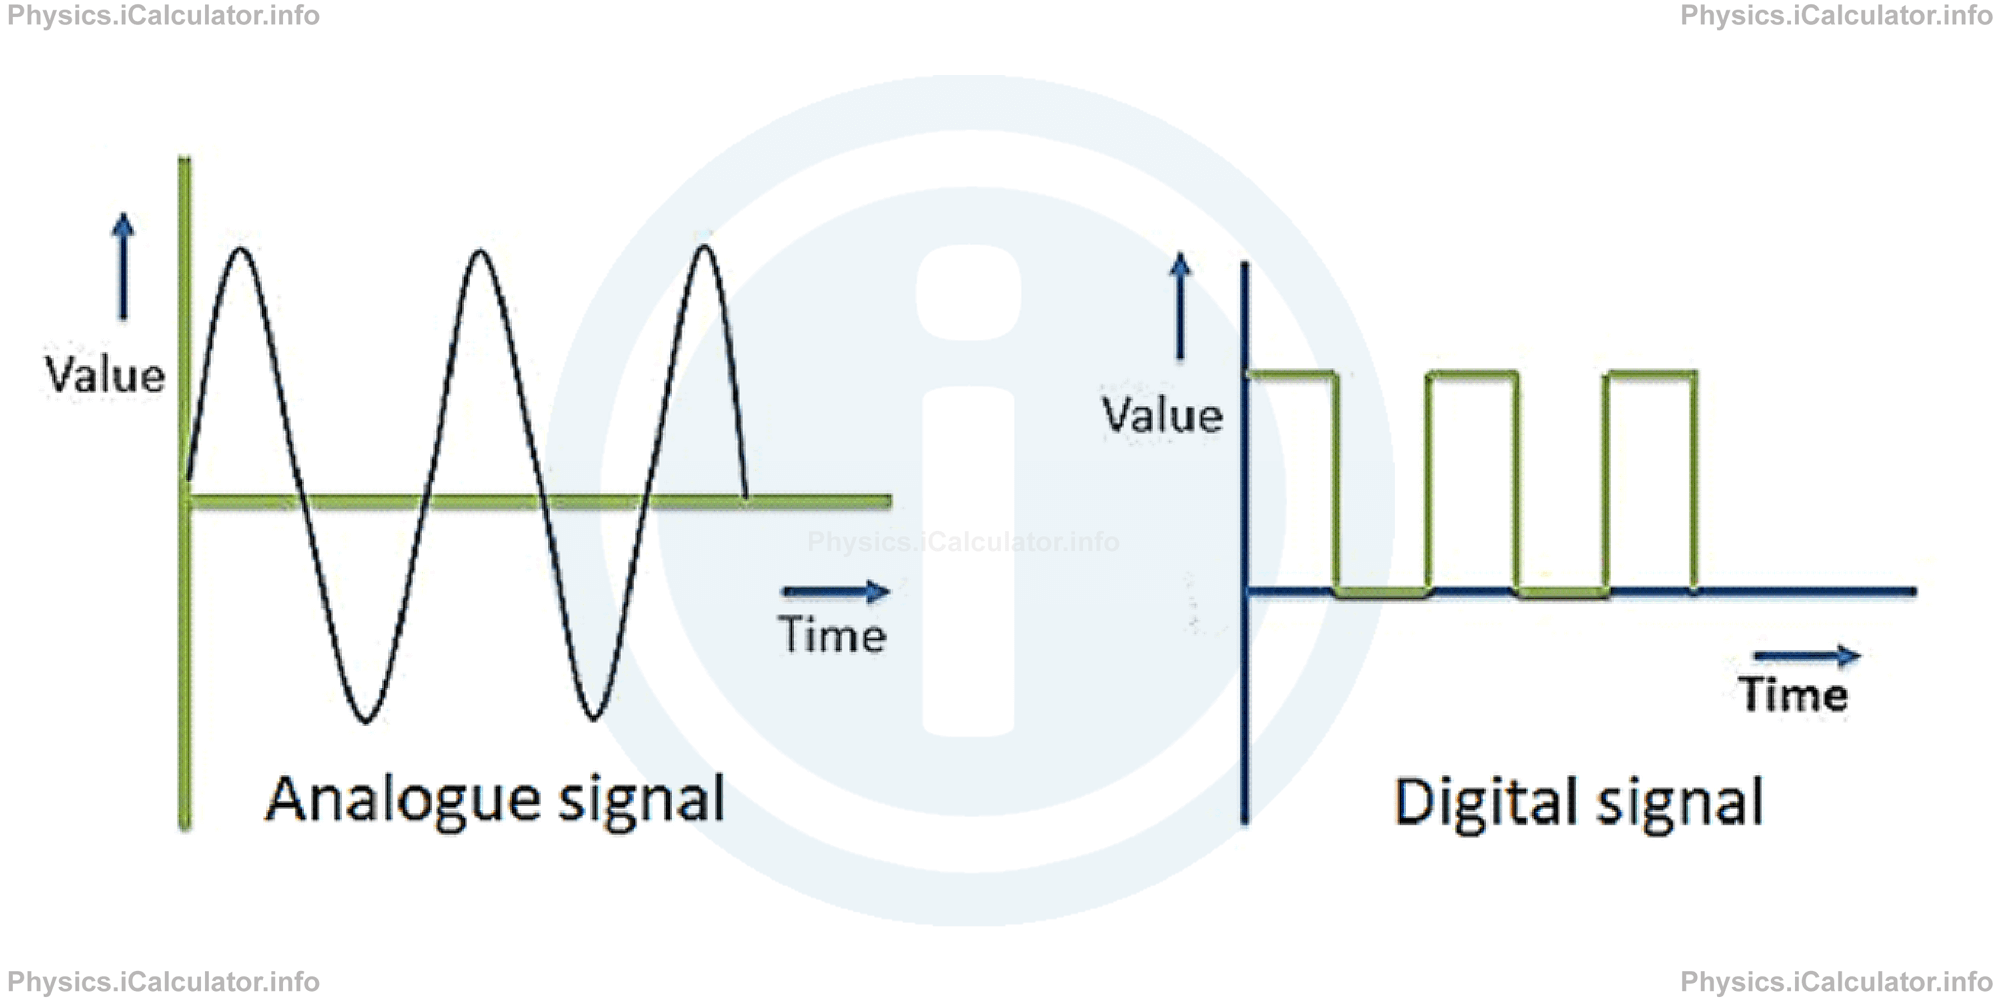 Physics Tutorials: This image provides visual information for the physics tutorial Electronic Essentials: Analogue and Digital Signals, Binary Operations and Logic Gates 